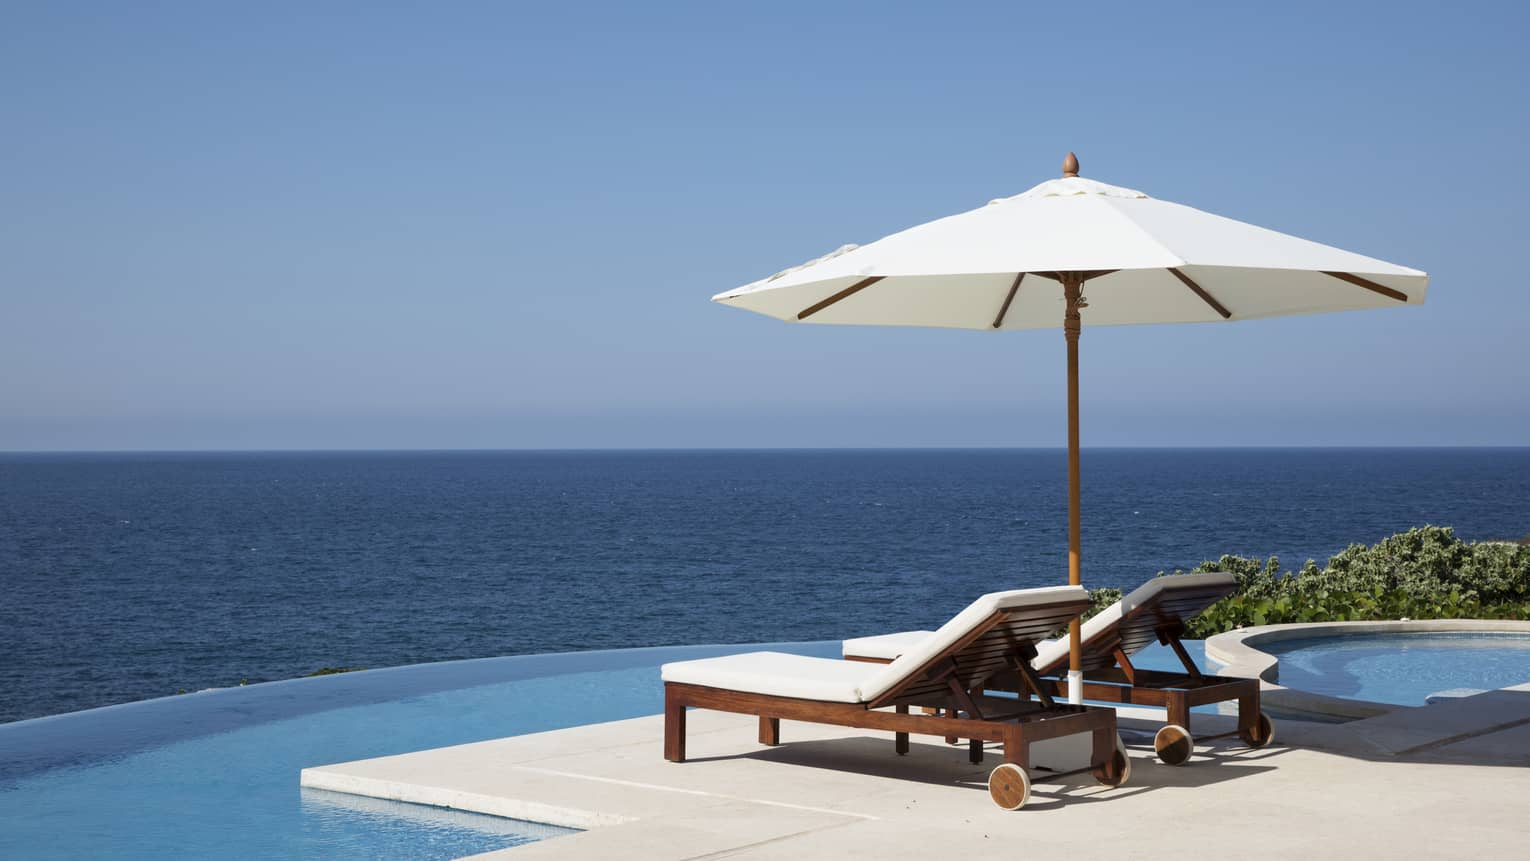 Two lounge chairs under white patio umbrella at edge of infinity pool, ocean views